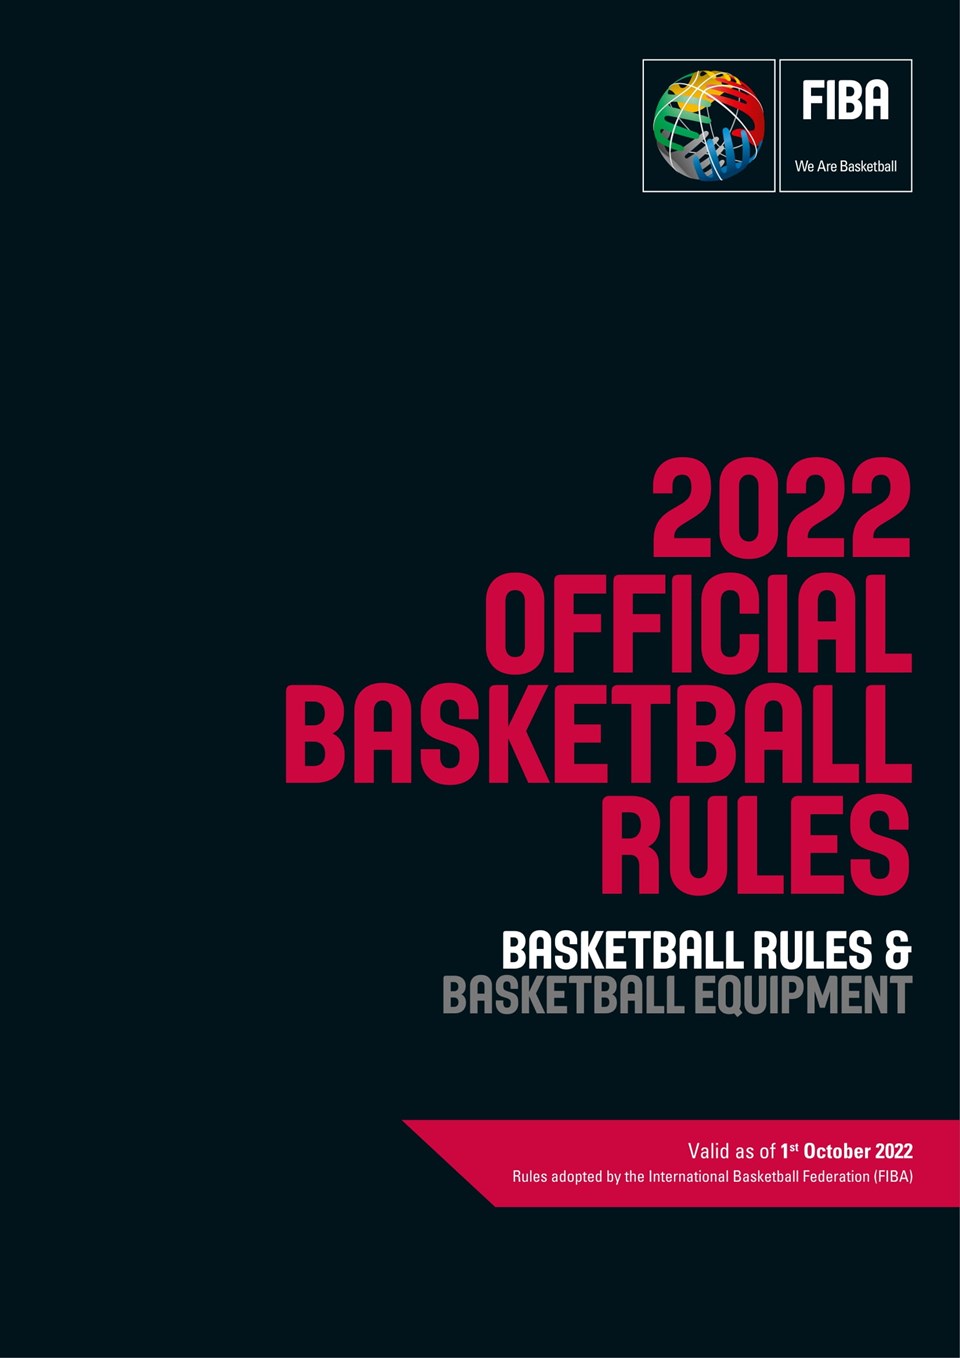 FIBA Official Basketball Rules 2022 set to come into force October 1